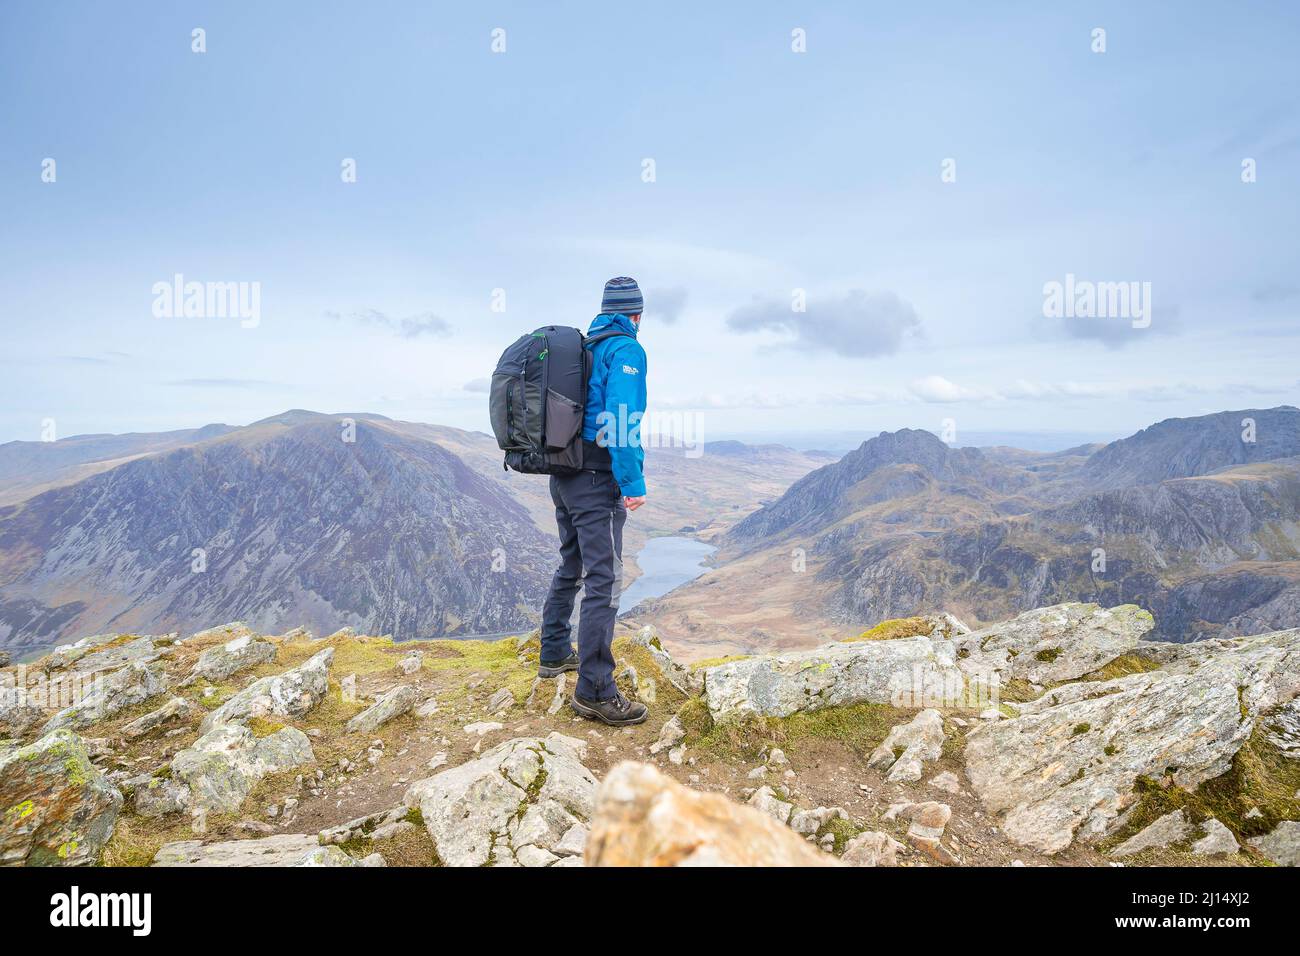 Rear view of isolated male backpacker hiking mountains in Snowdonia National Park, North Wales, UK, looking at landscape scenery on wild camping trip. Stock Photo